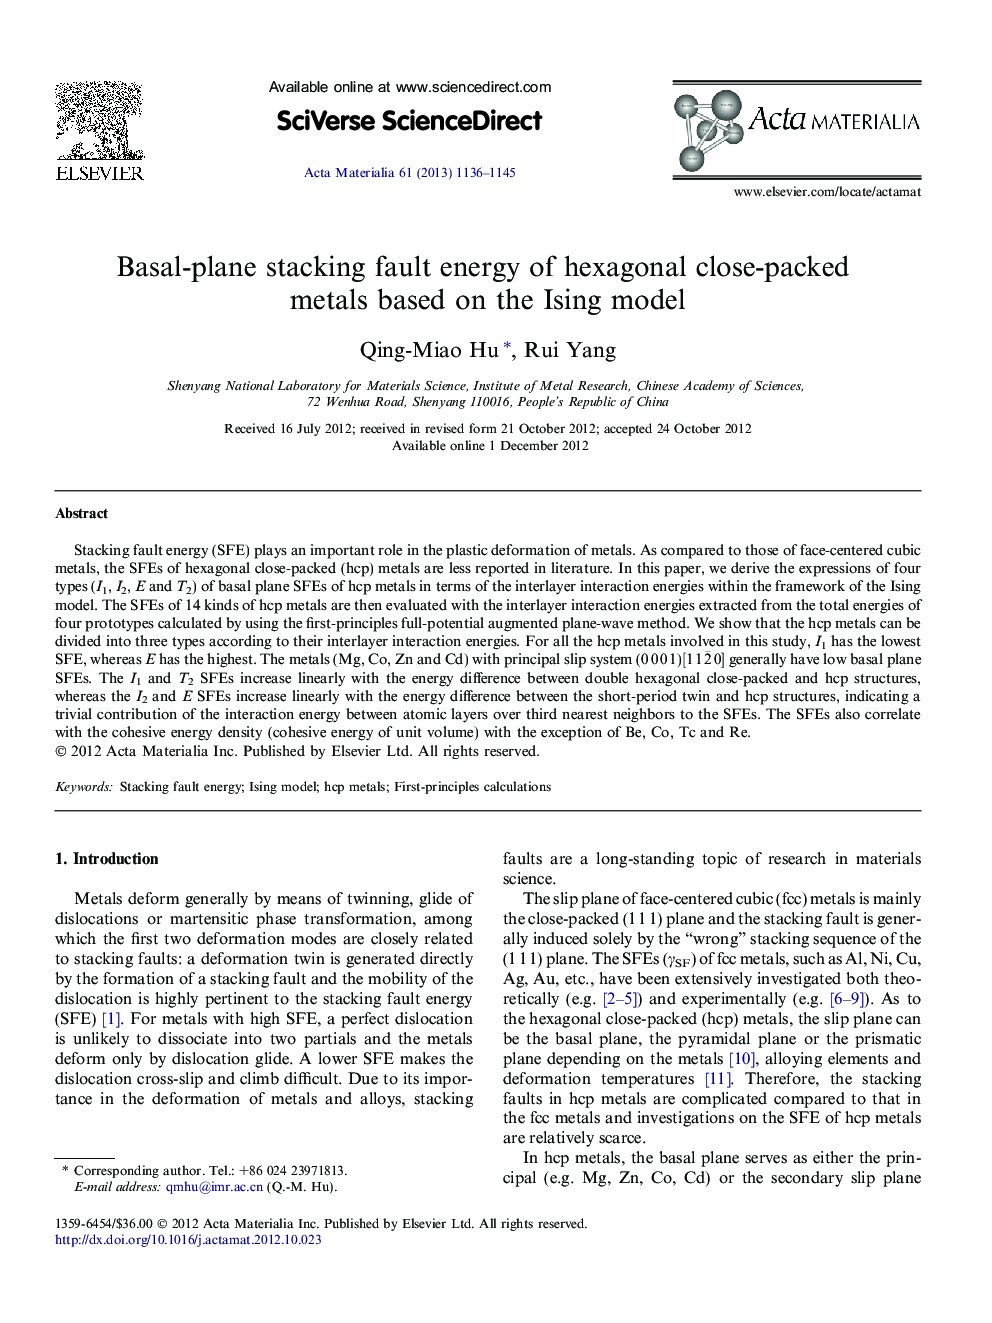 Basal-plane stacking fault energy of hexagonal close-packed metals based on the Ising model